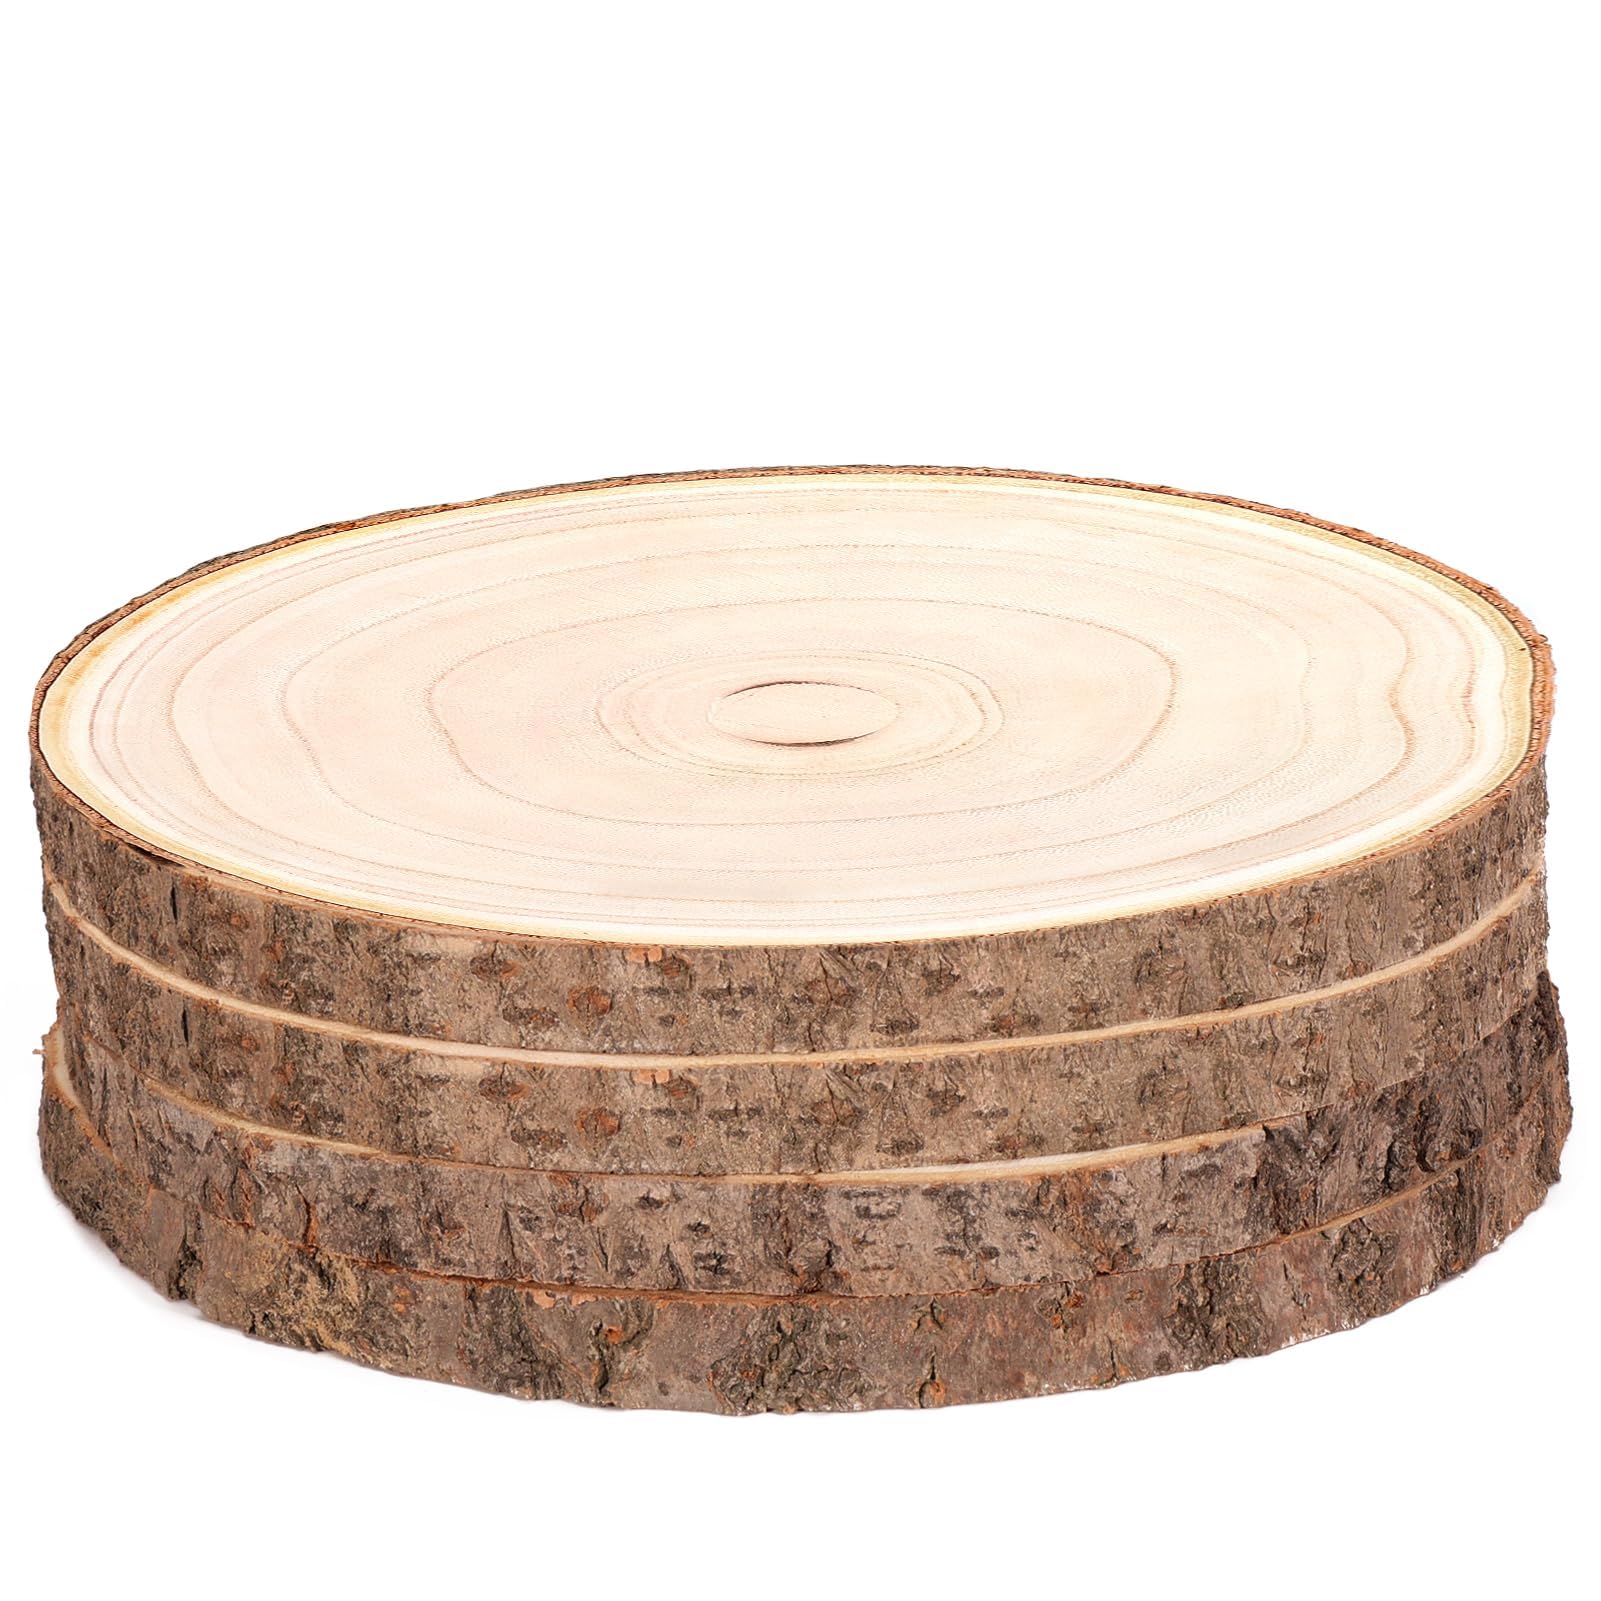 Caydo 4 Piece 10-11 Inch Wood Centerpieces for Tables, Large Wood Slices for Centerpieces for Wedding Table Decoration, Candy Bar, Party, and DIY Projects